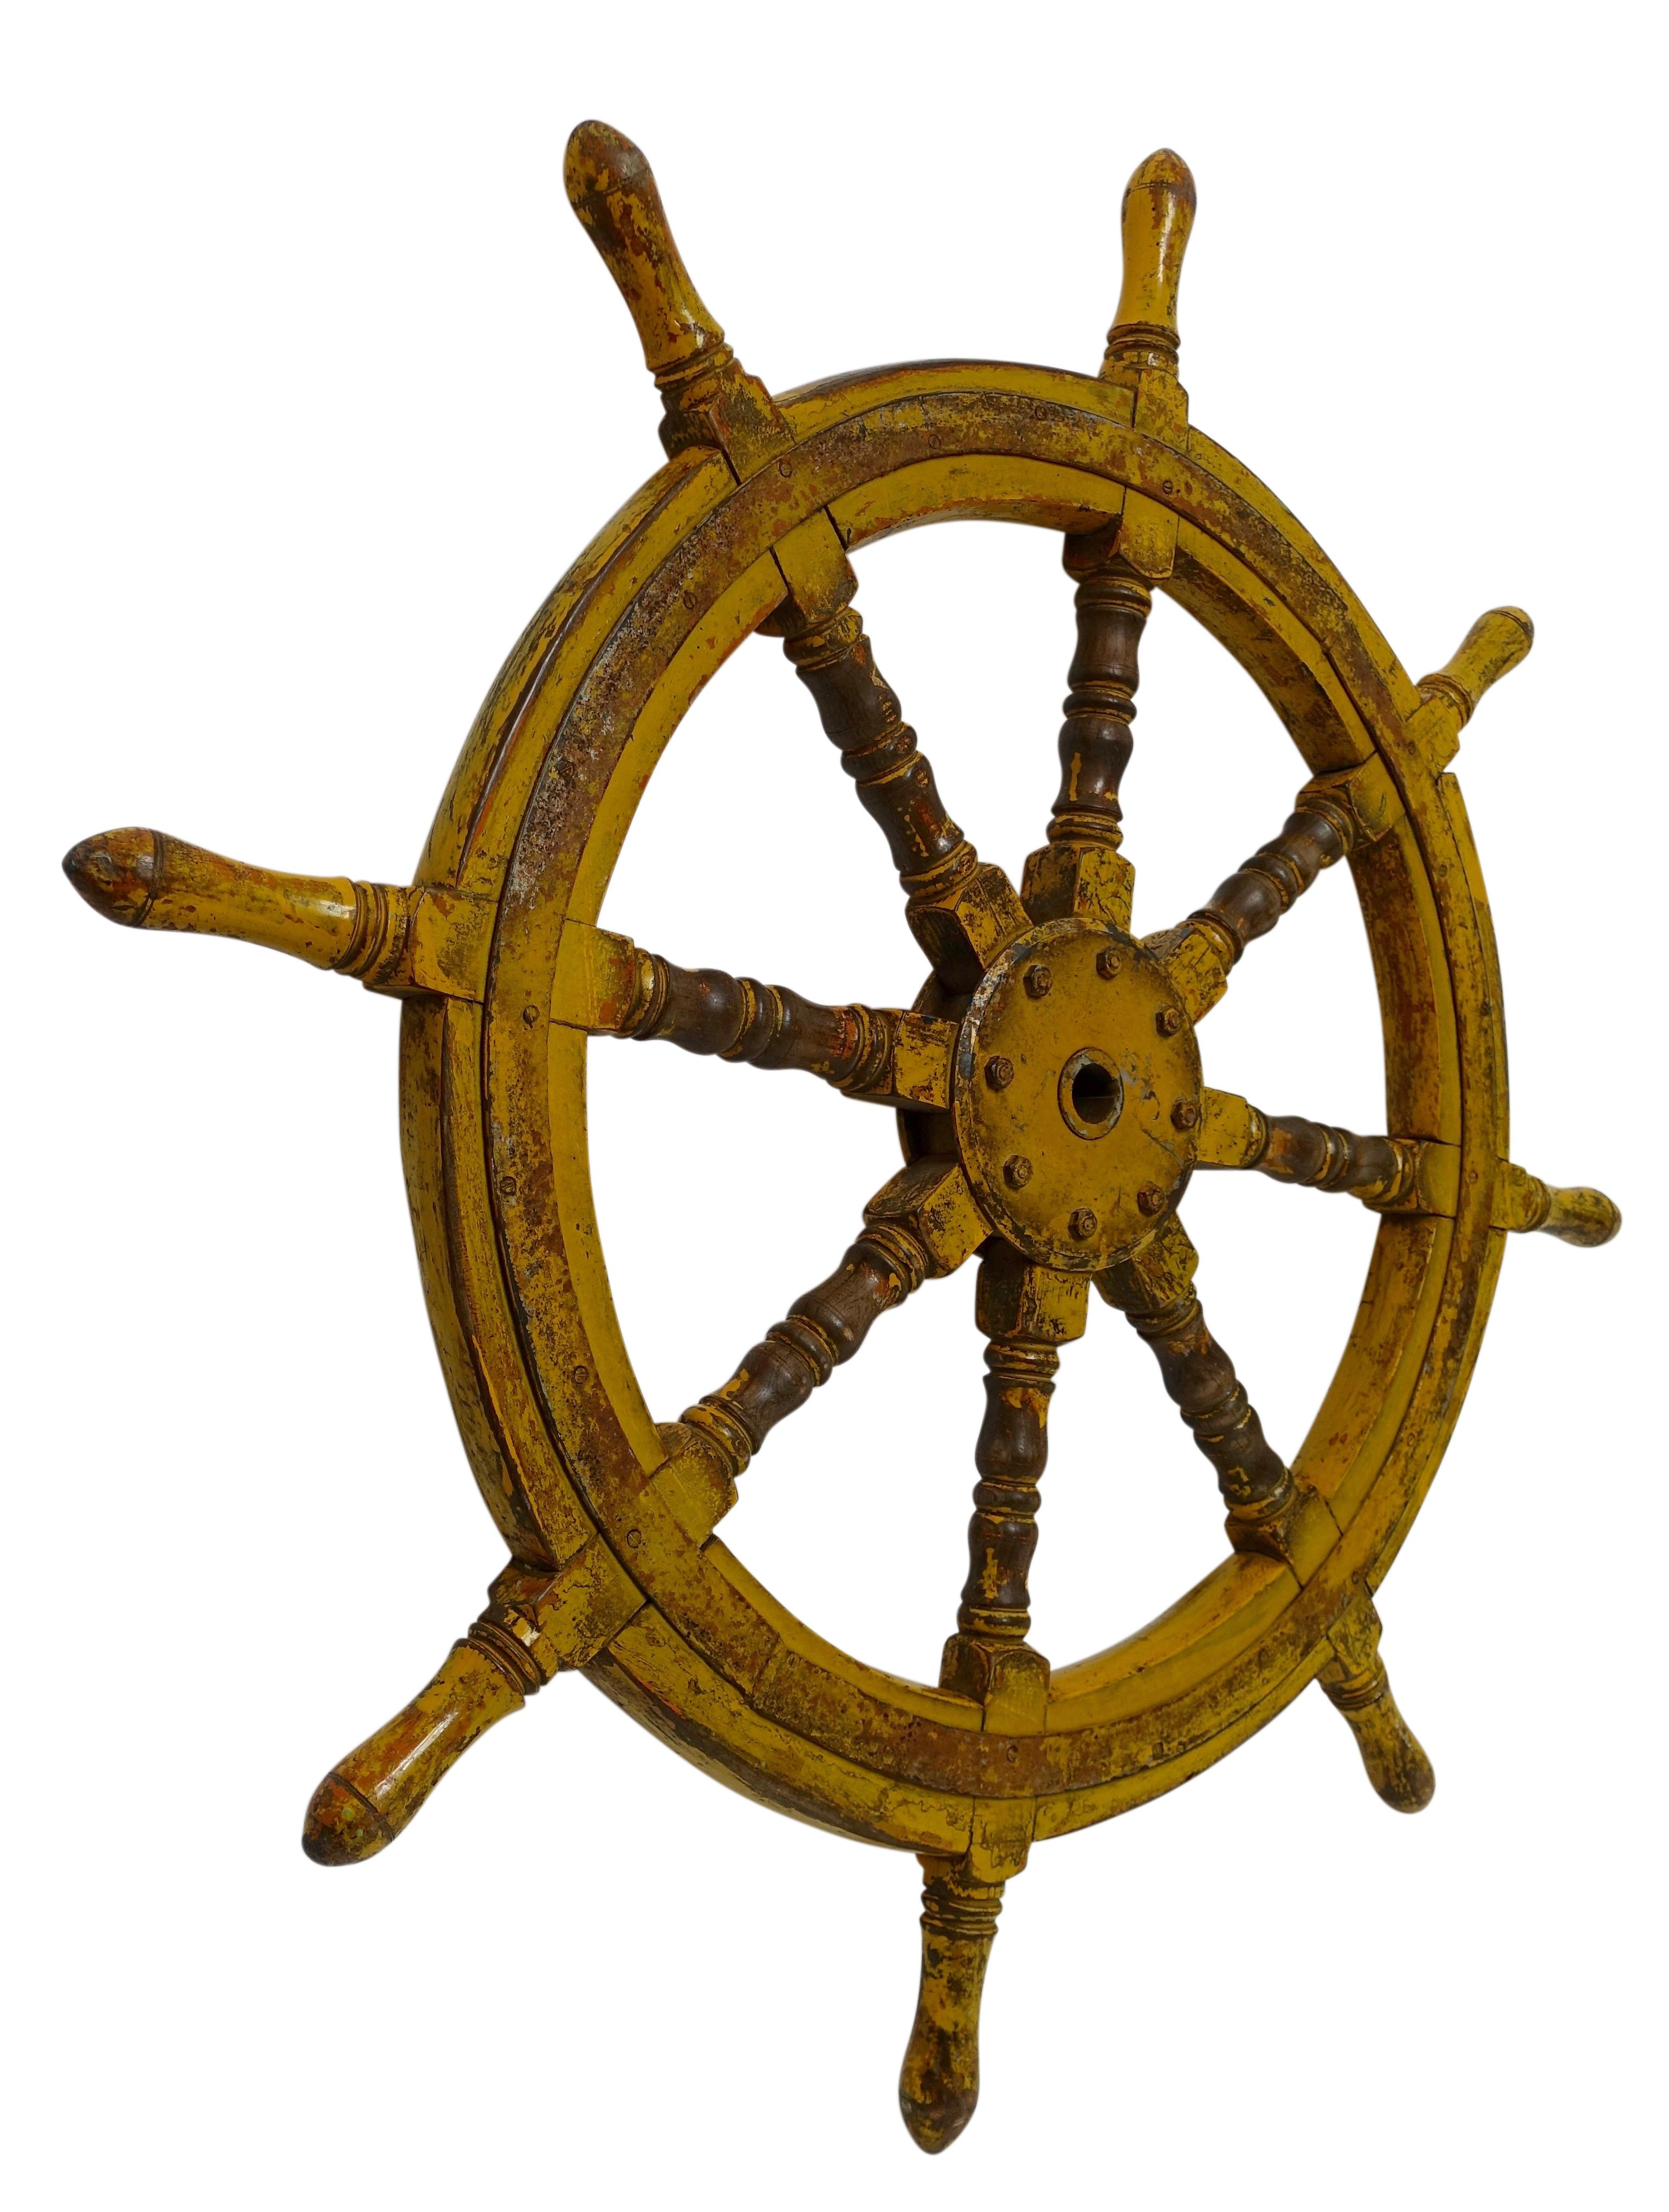 A walnut ships wheel with old yellow paint and wrought iron banding. Origin Unknown. Load of charm and character with a mix of the wood and iron and the wearing of the painted finish.